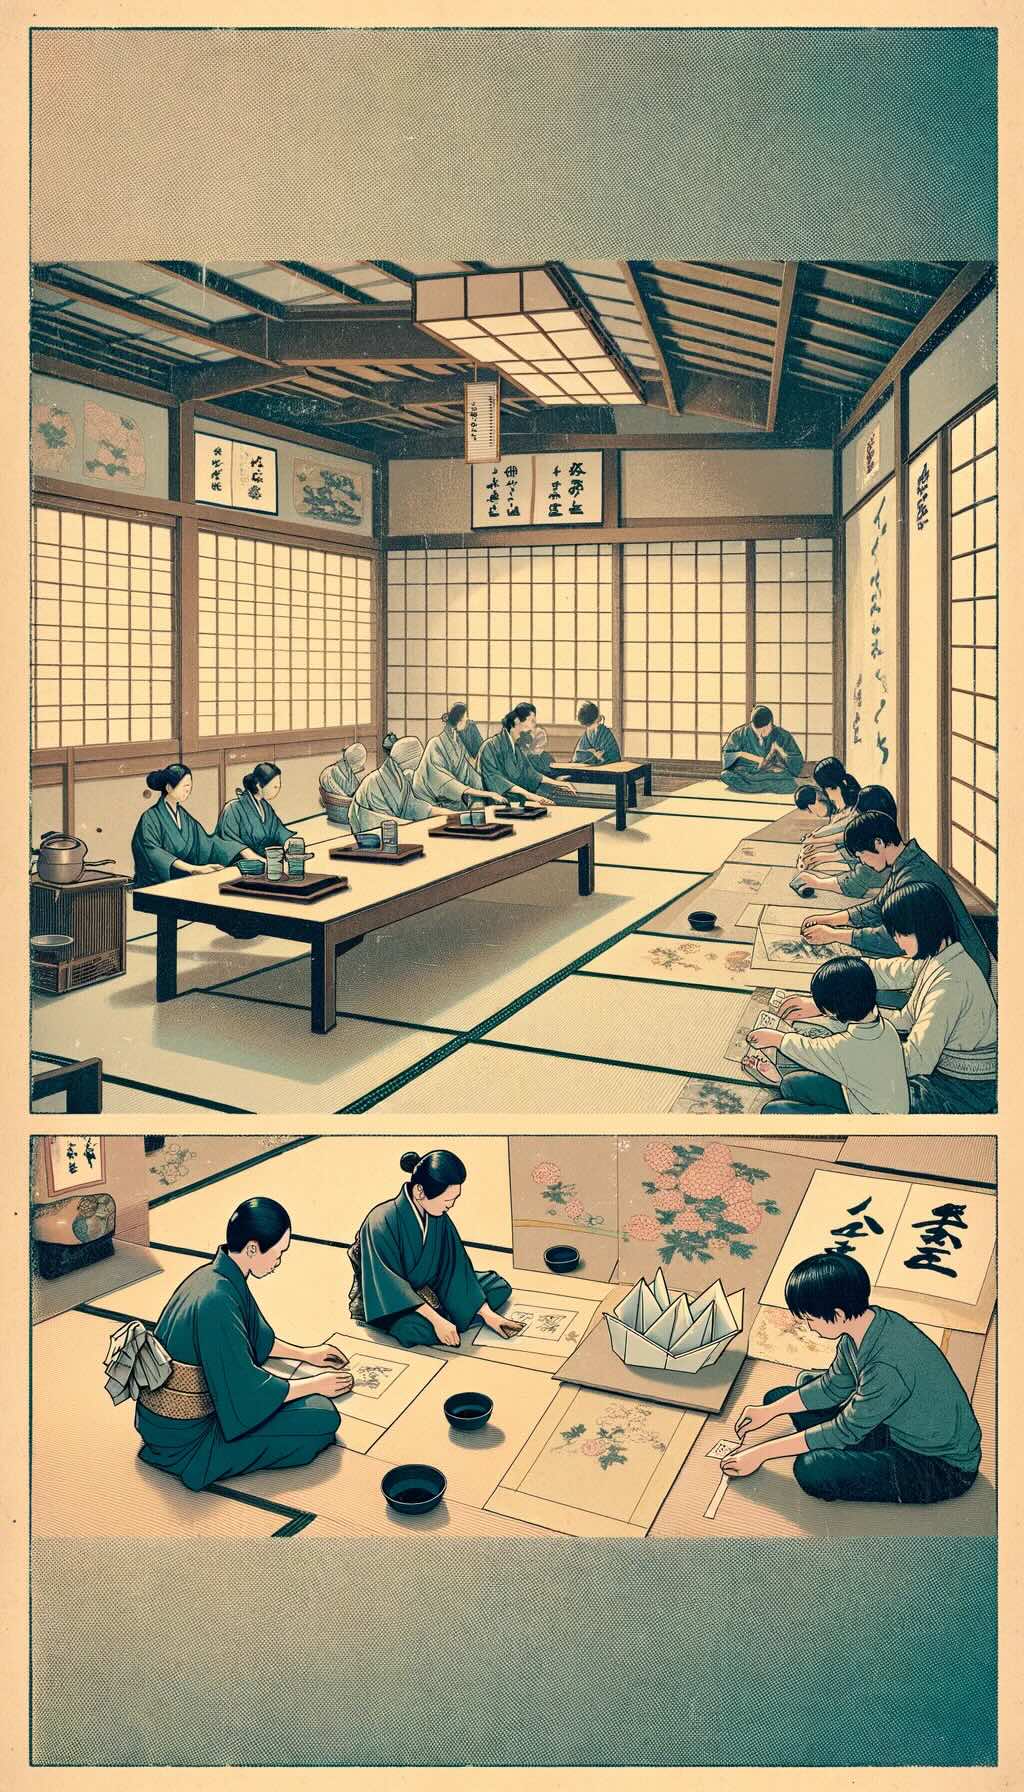 Traditional Japanese activities like the tea ceremony, origami, and calligraphy workshops, highlighting their role in teaching mindfulness, creativity, and appreciation of Japanese traditions